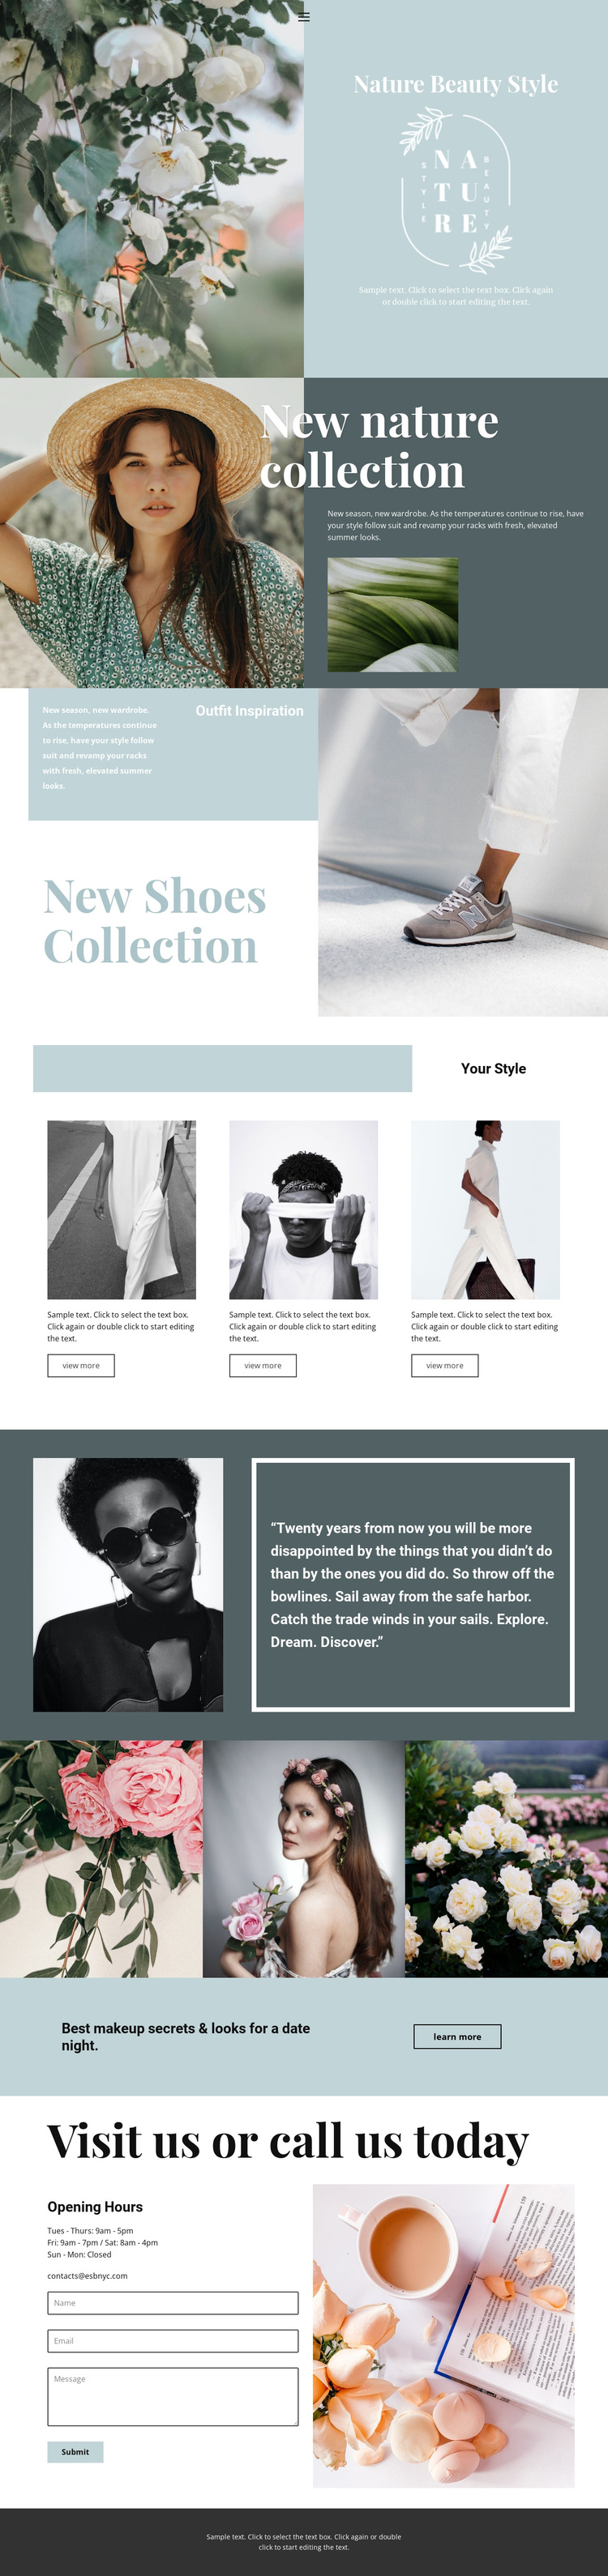 Nature collection Joomla Template